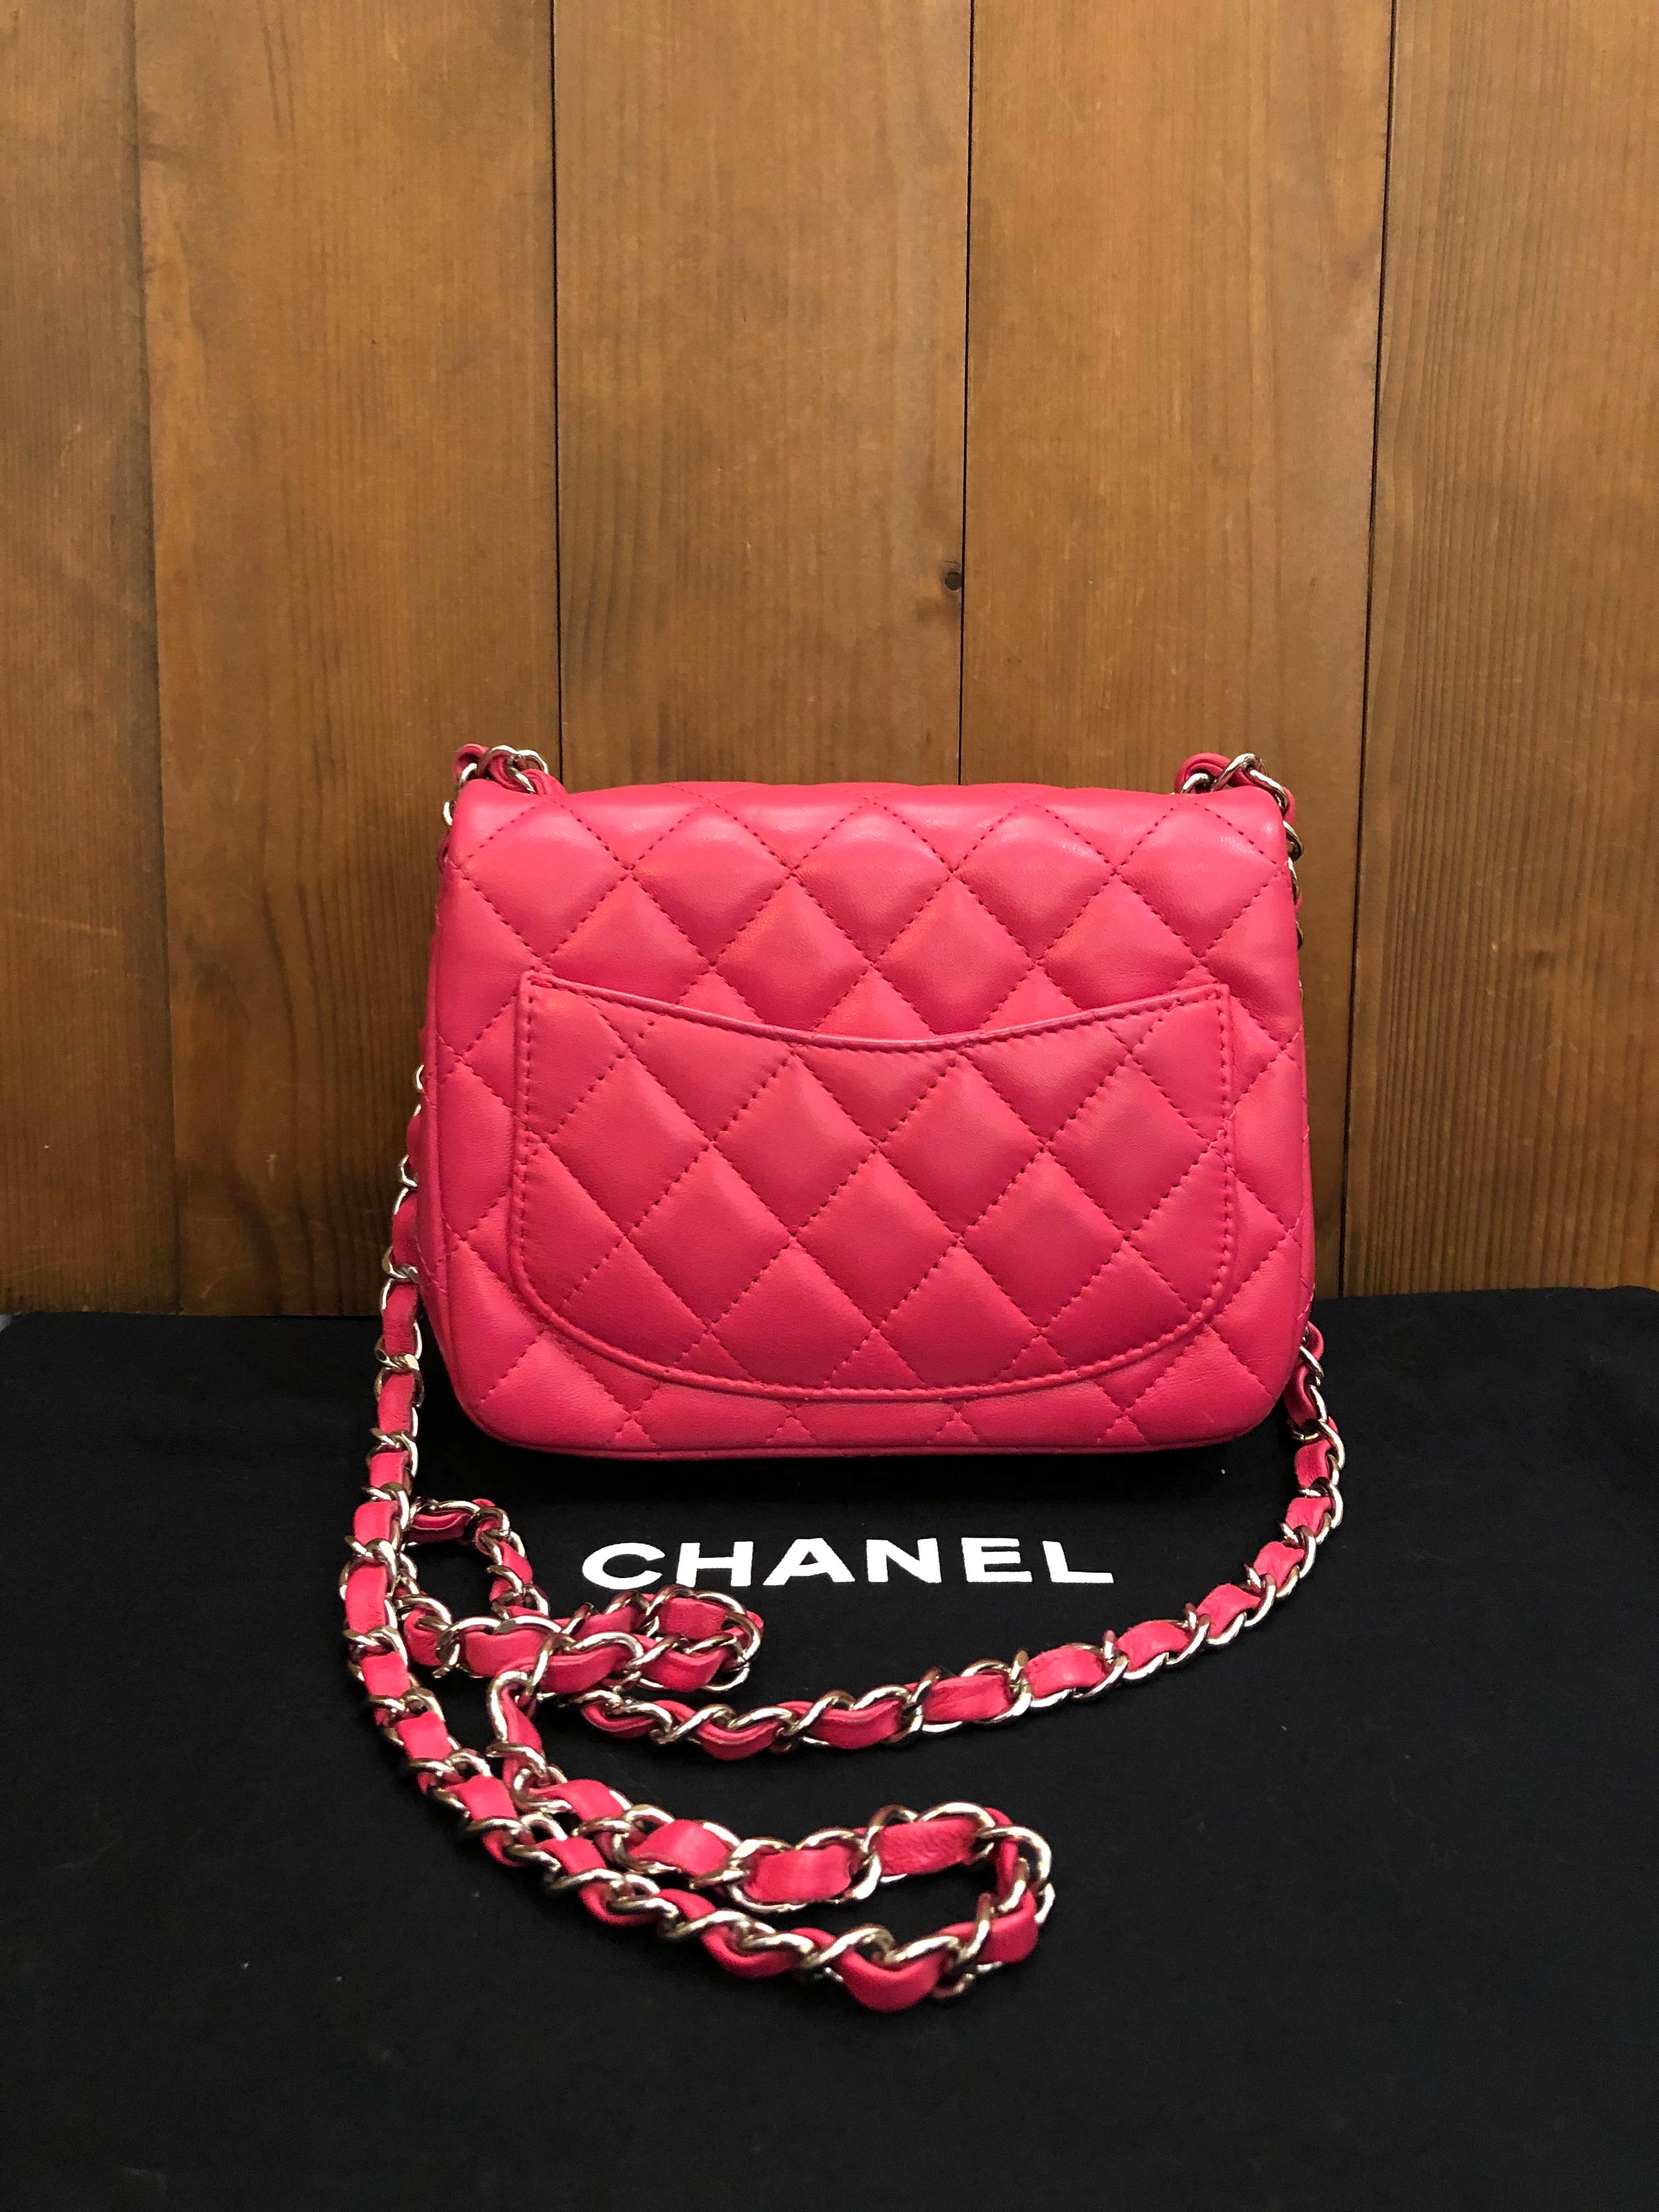 2014 Chanel mini flap bag in pink lambskin leather. It is compact in size and is the perfect bag that holds your cell phone, keys, and lip gloss. It also features an inside open flat pocket that fits cards or money as well as one zip pocket for